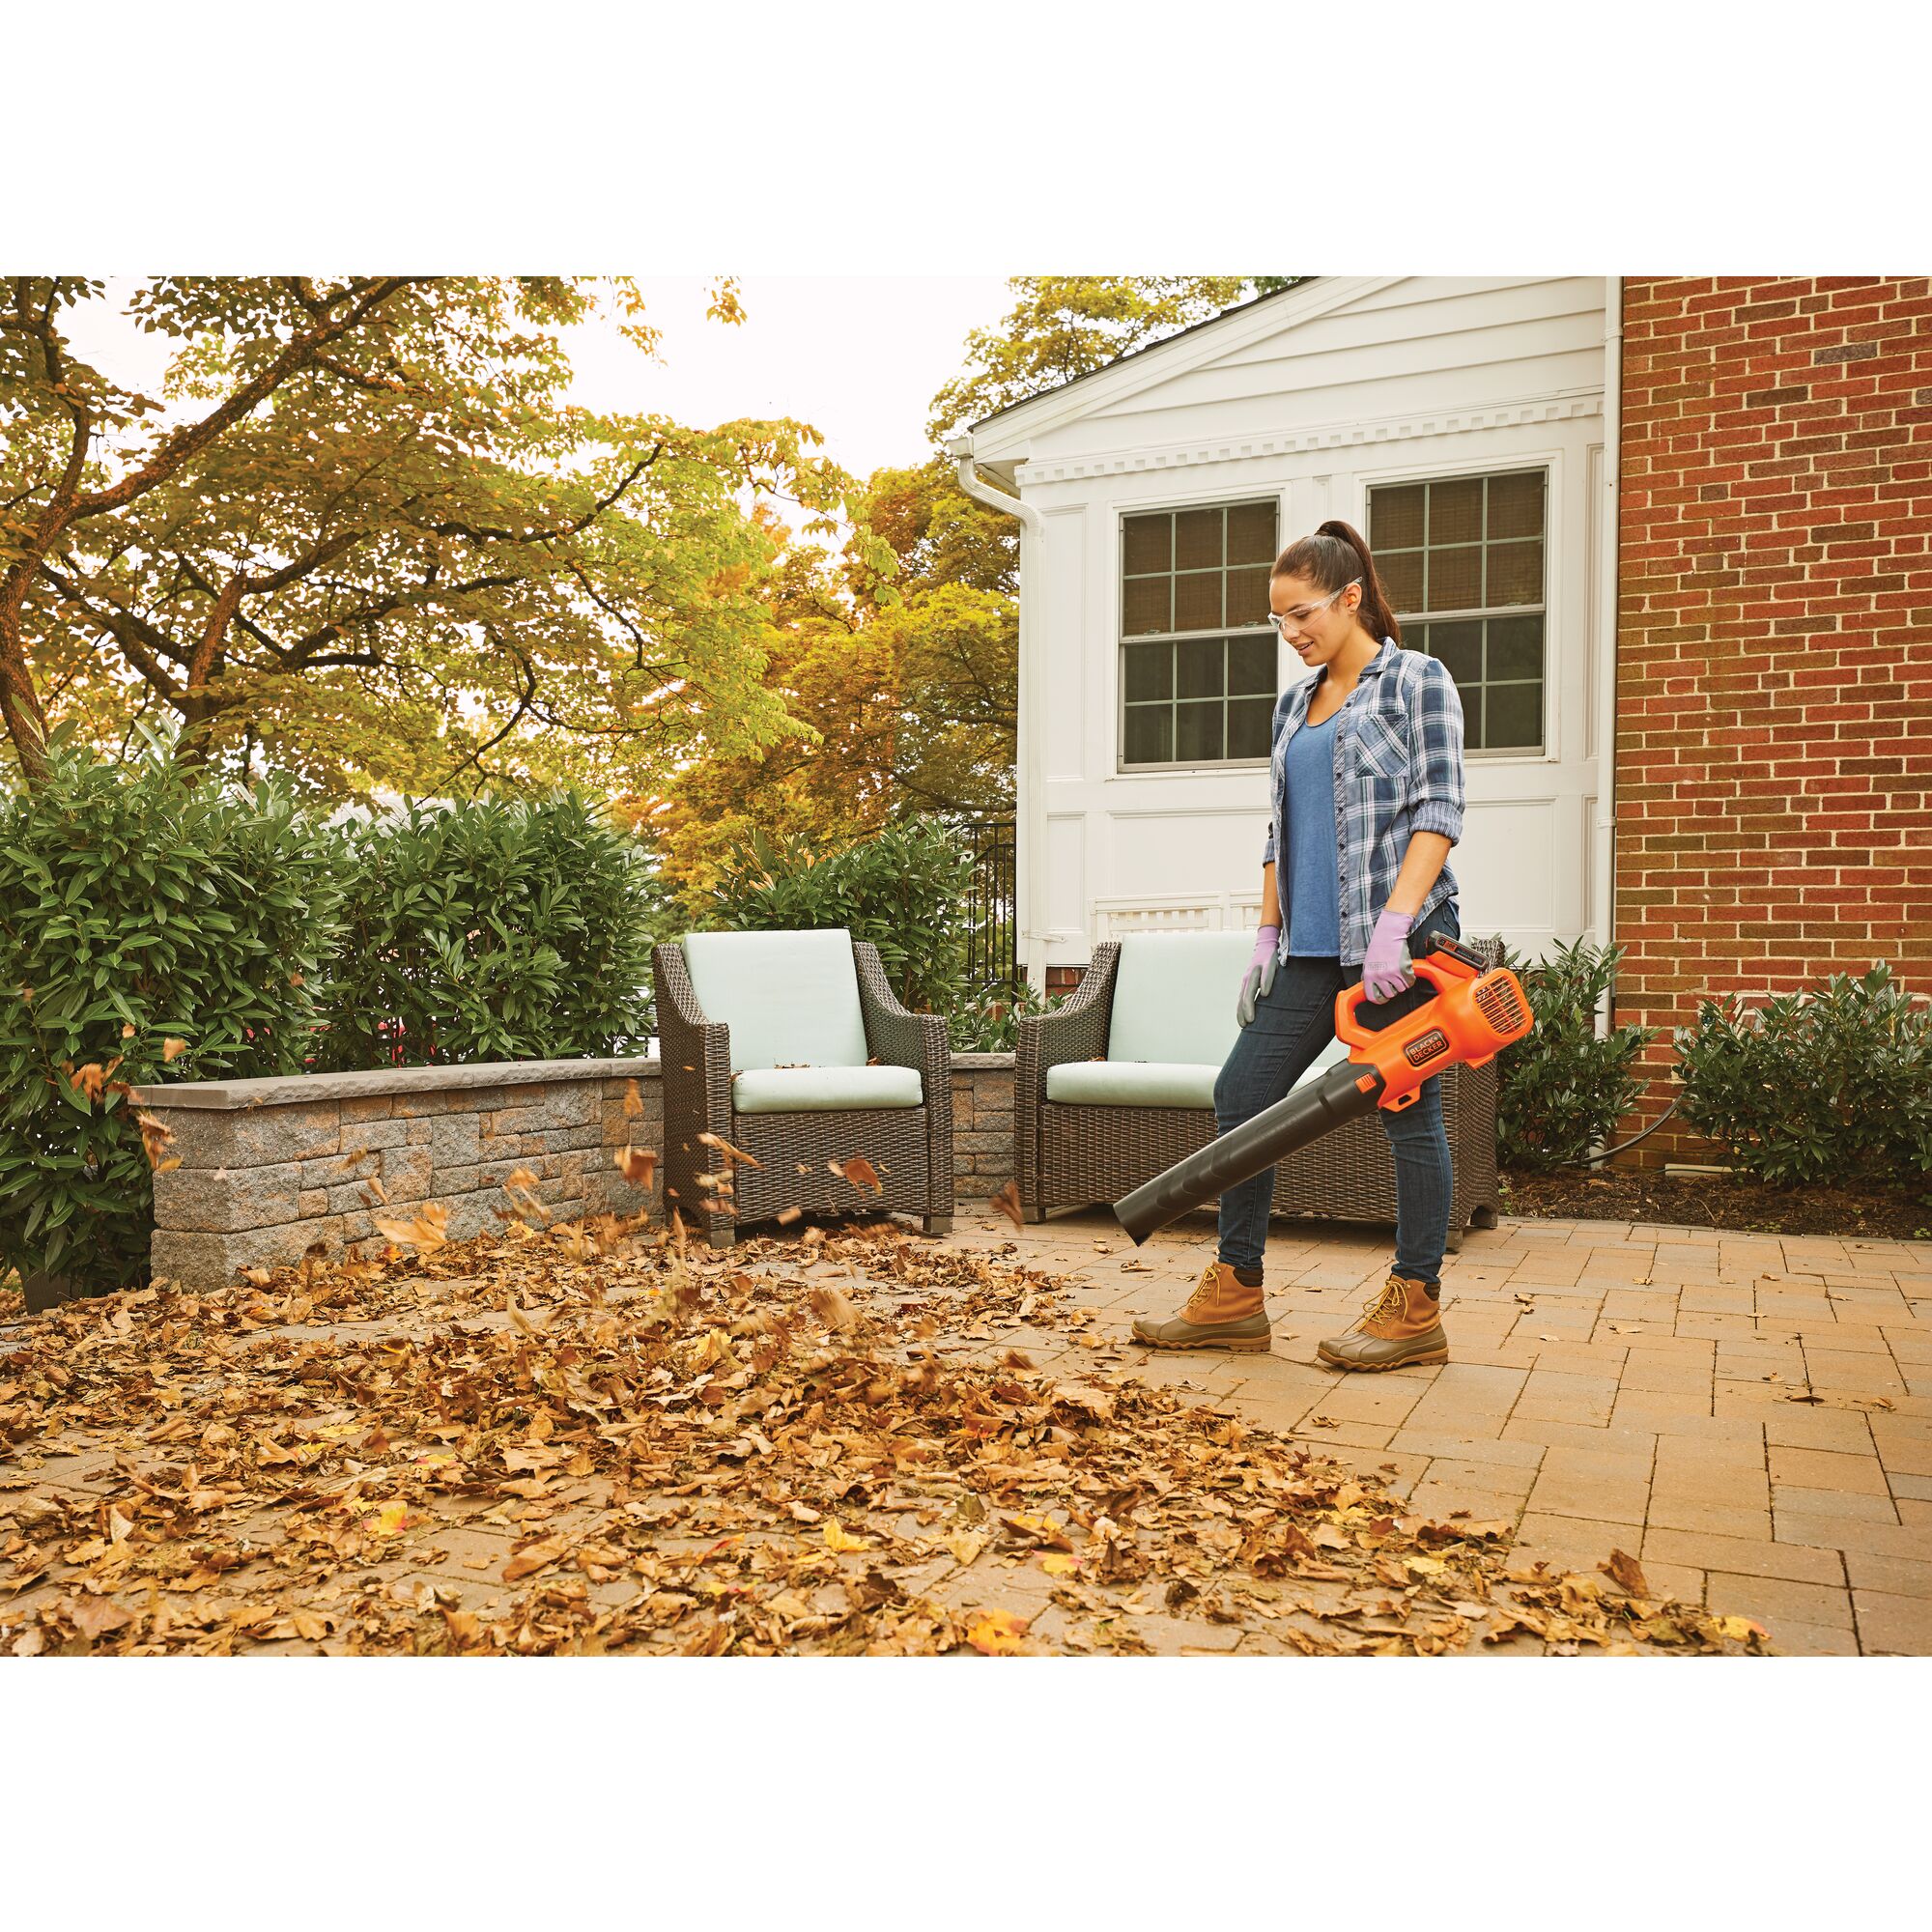 Axial Leaf Blower being used by person for backyard cleanup of rusty leaves.